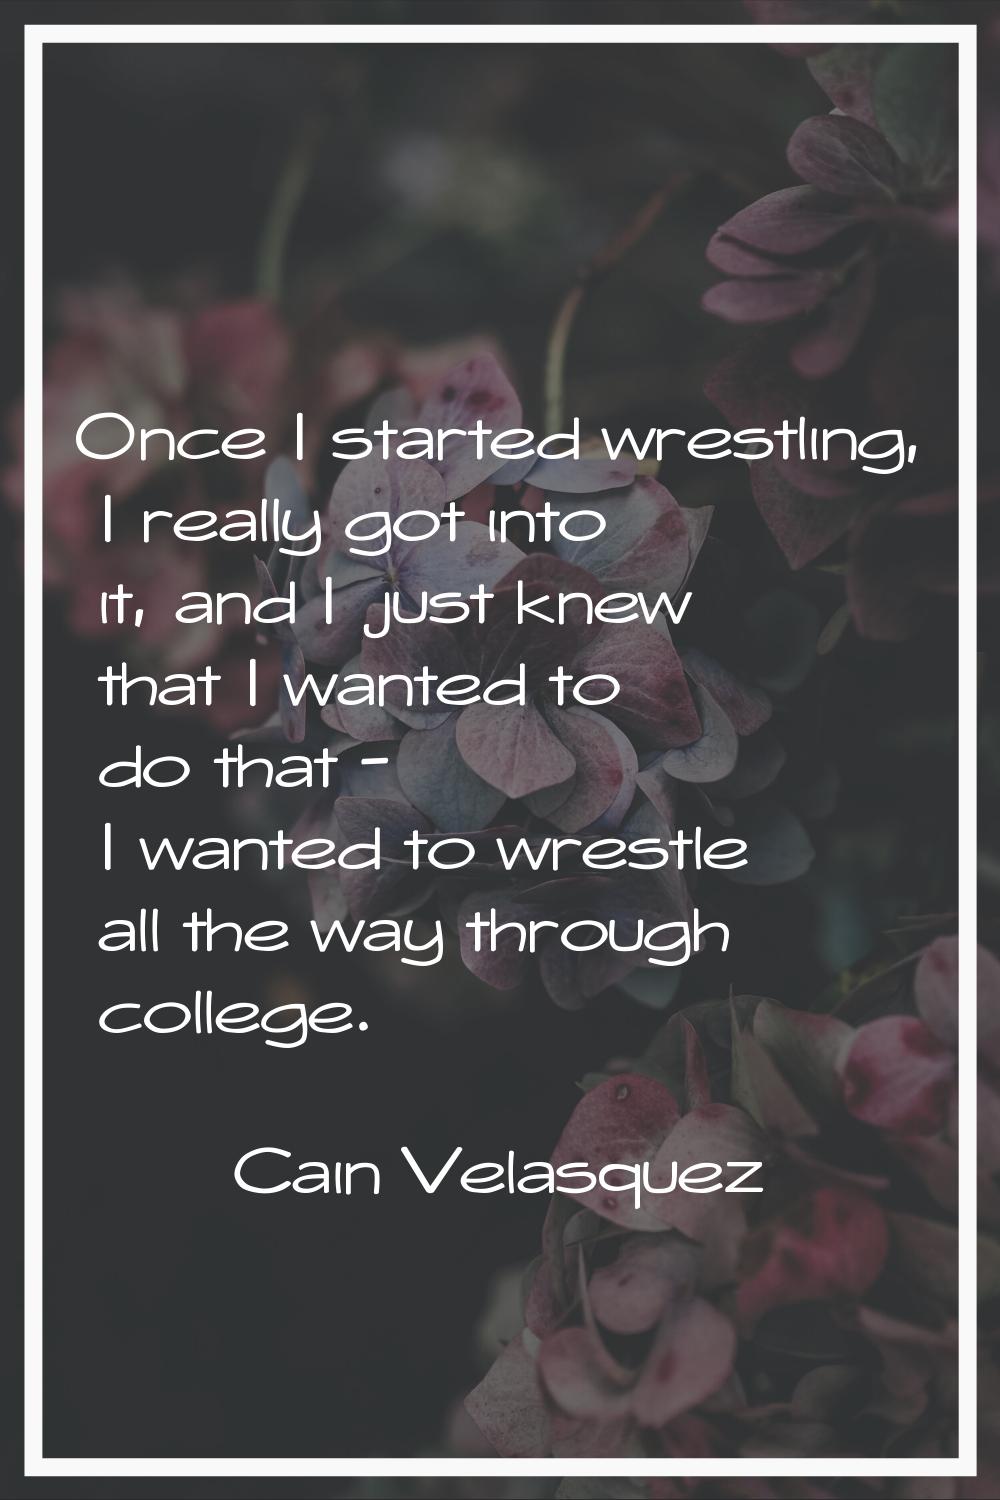 Once I started wrestling, I really got into it, and I just knew that I wanted to do that - I wanted